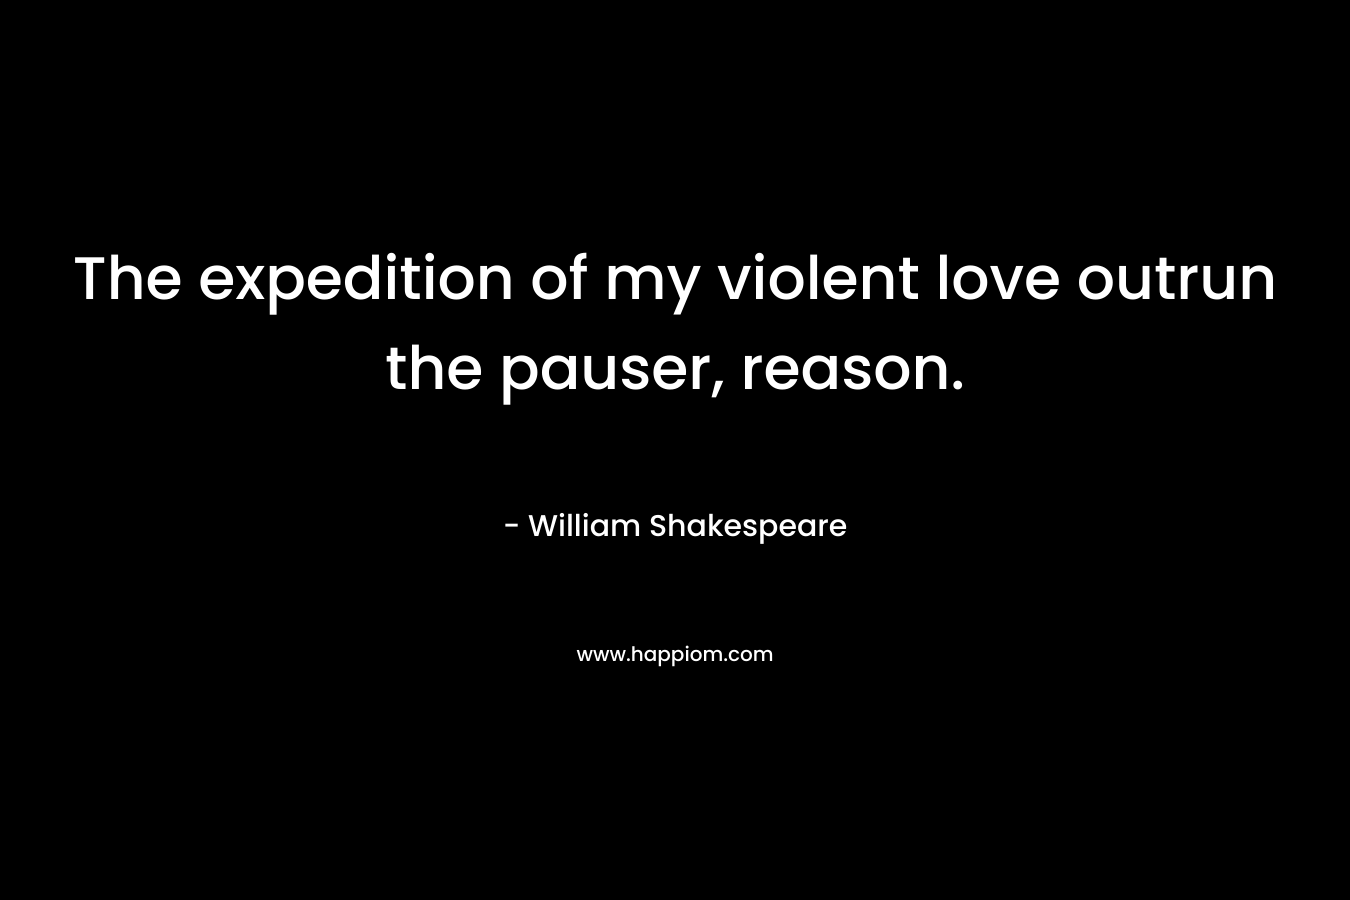 The expedition of my violent love outrun the pauser, reason. – William Shakespeare